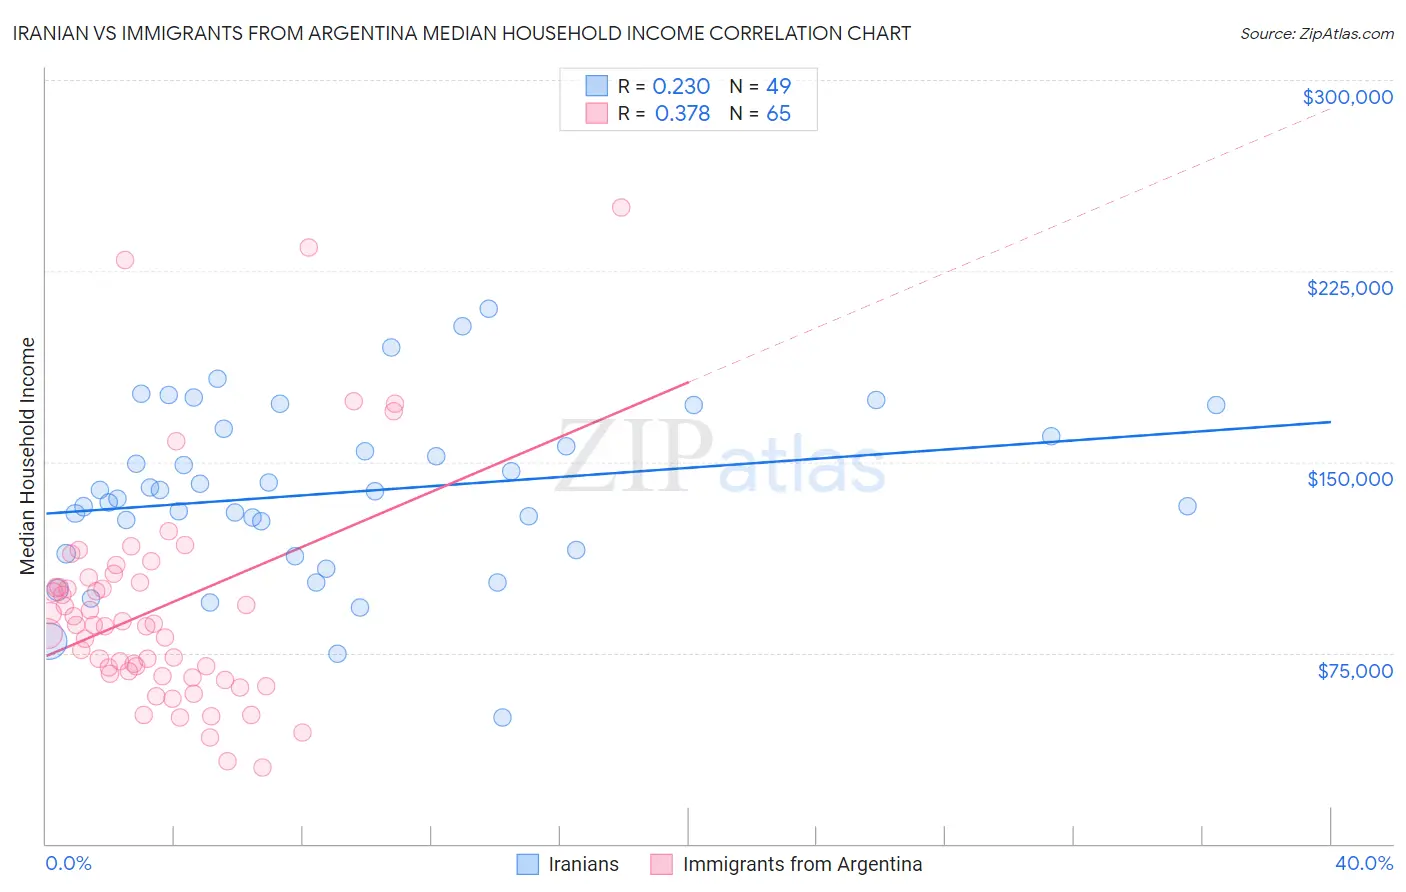 Iranian vs Immigrants from Argentina Median Household Income